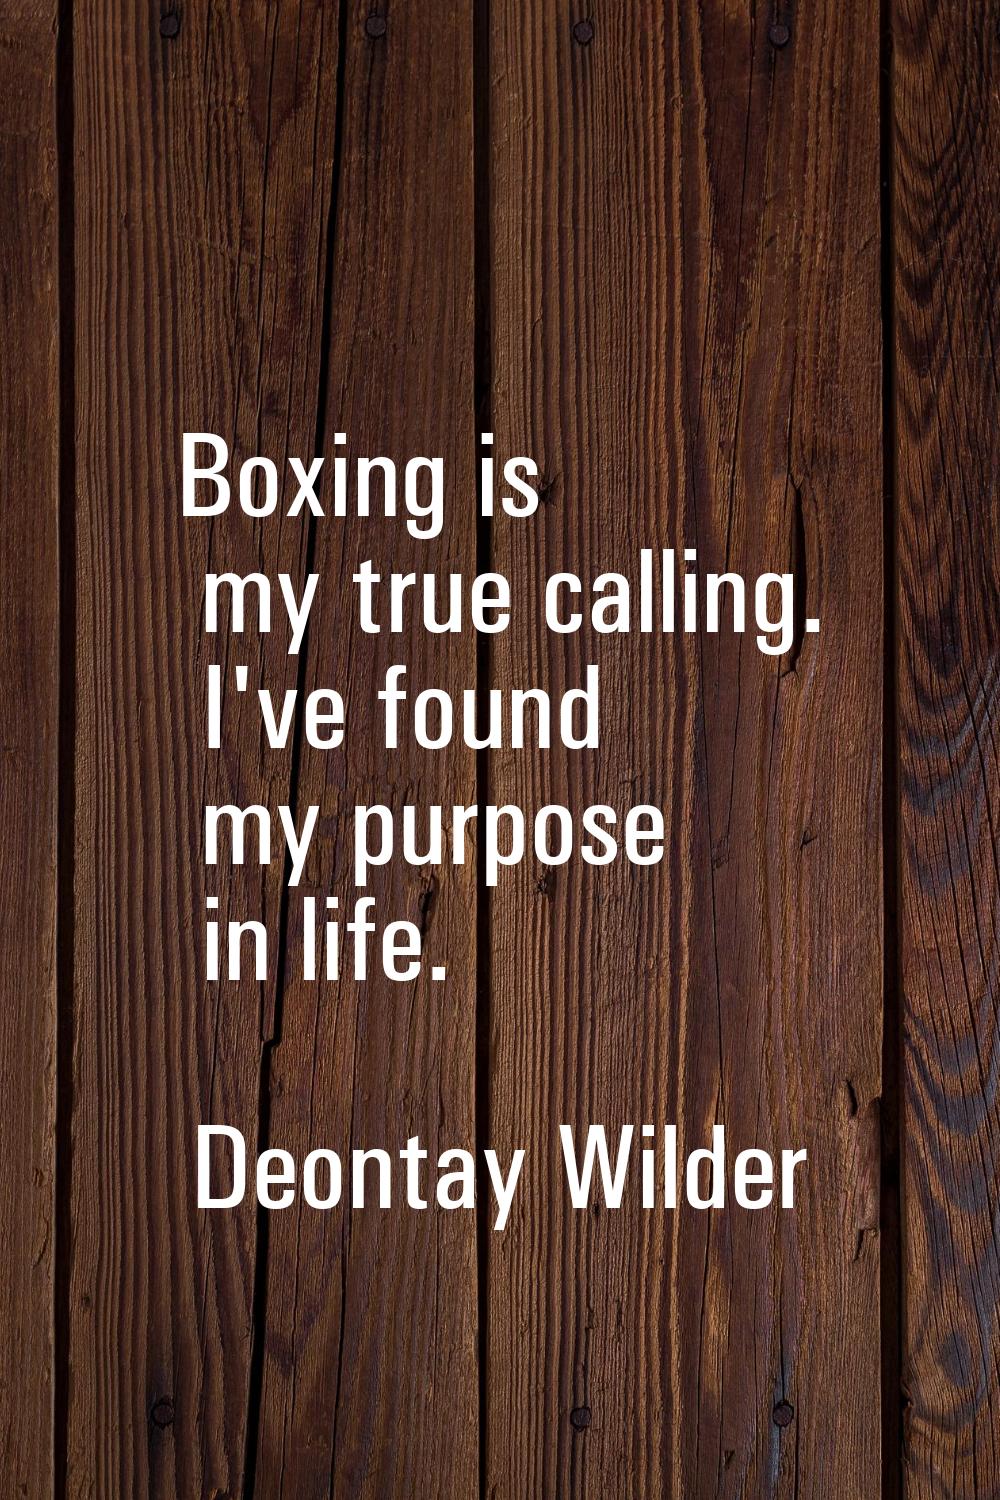 Boxing is my true calling. I've found my purpose in life.